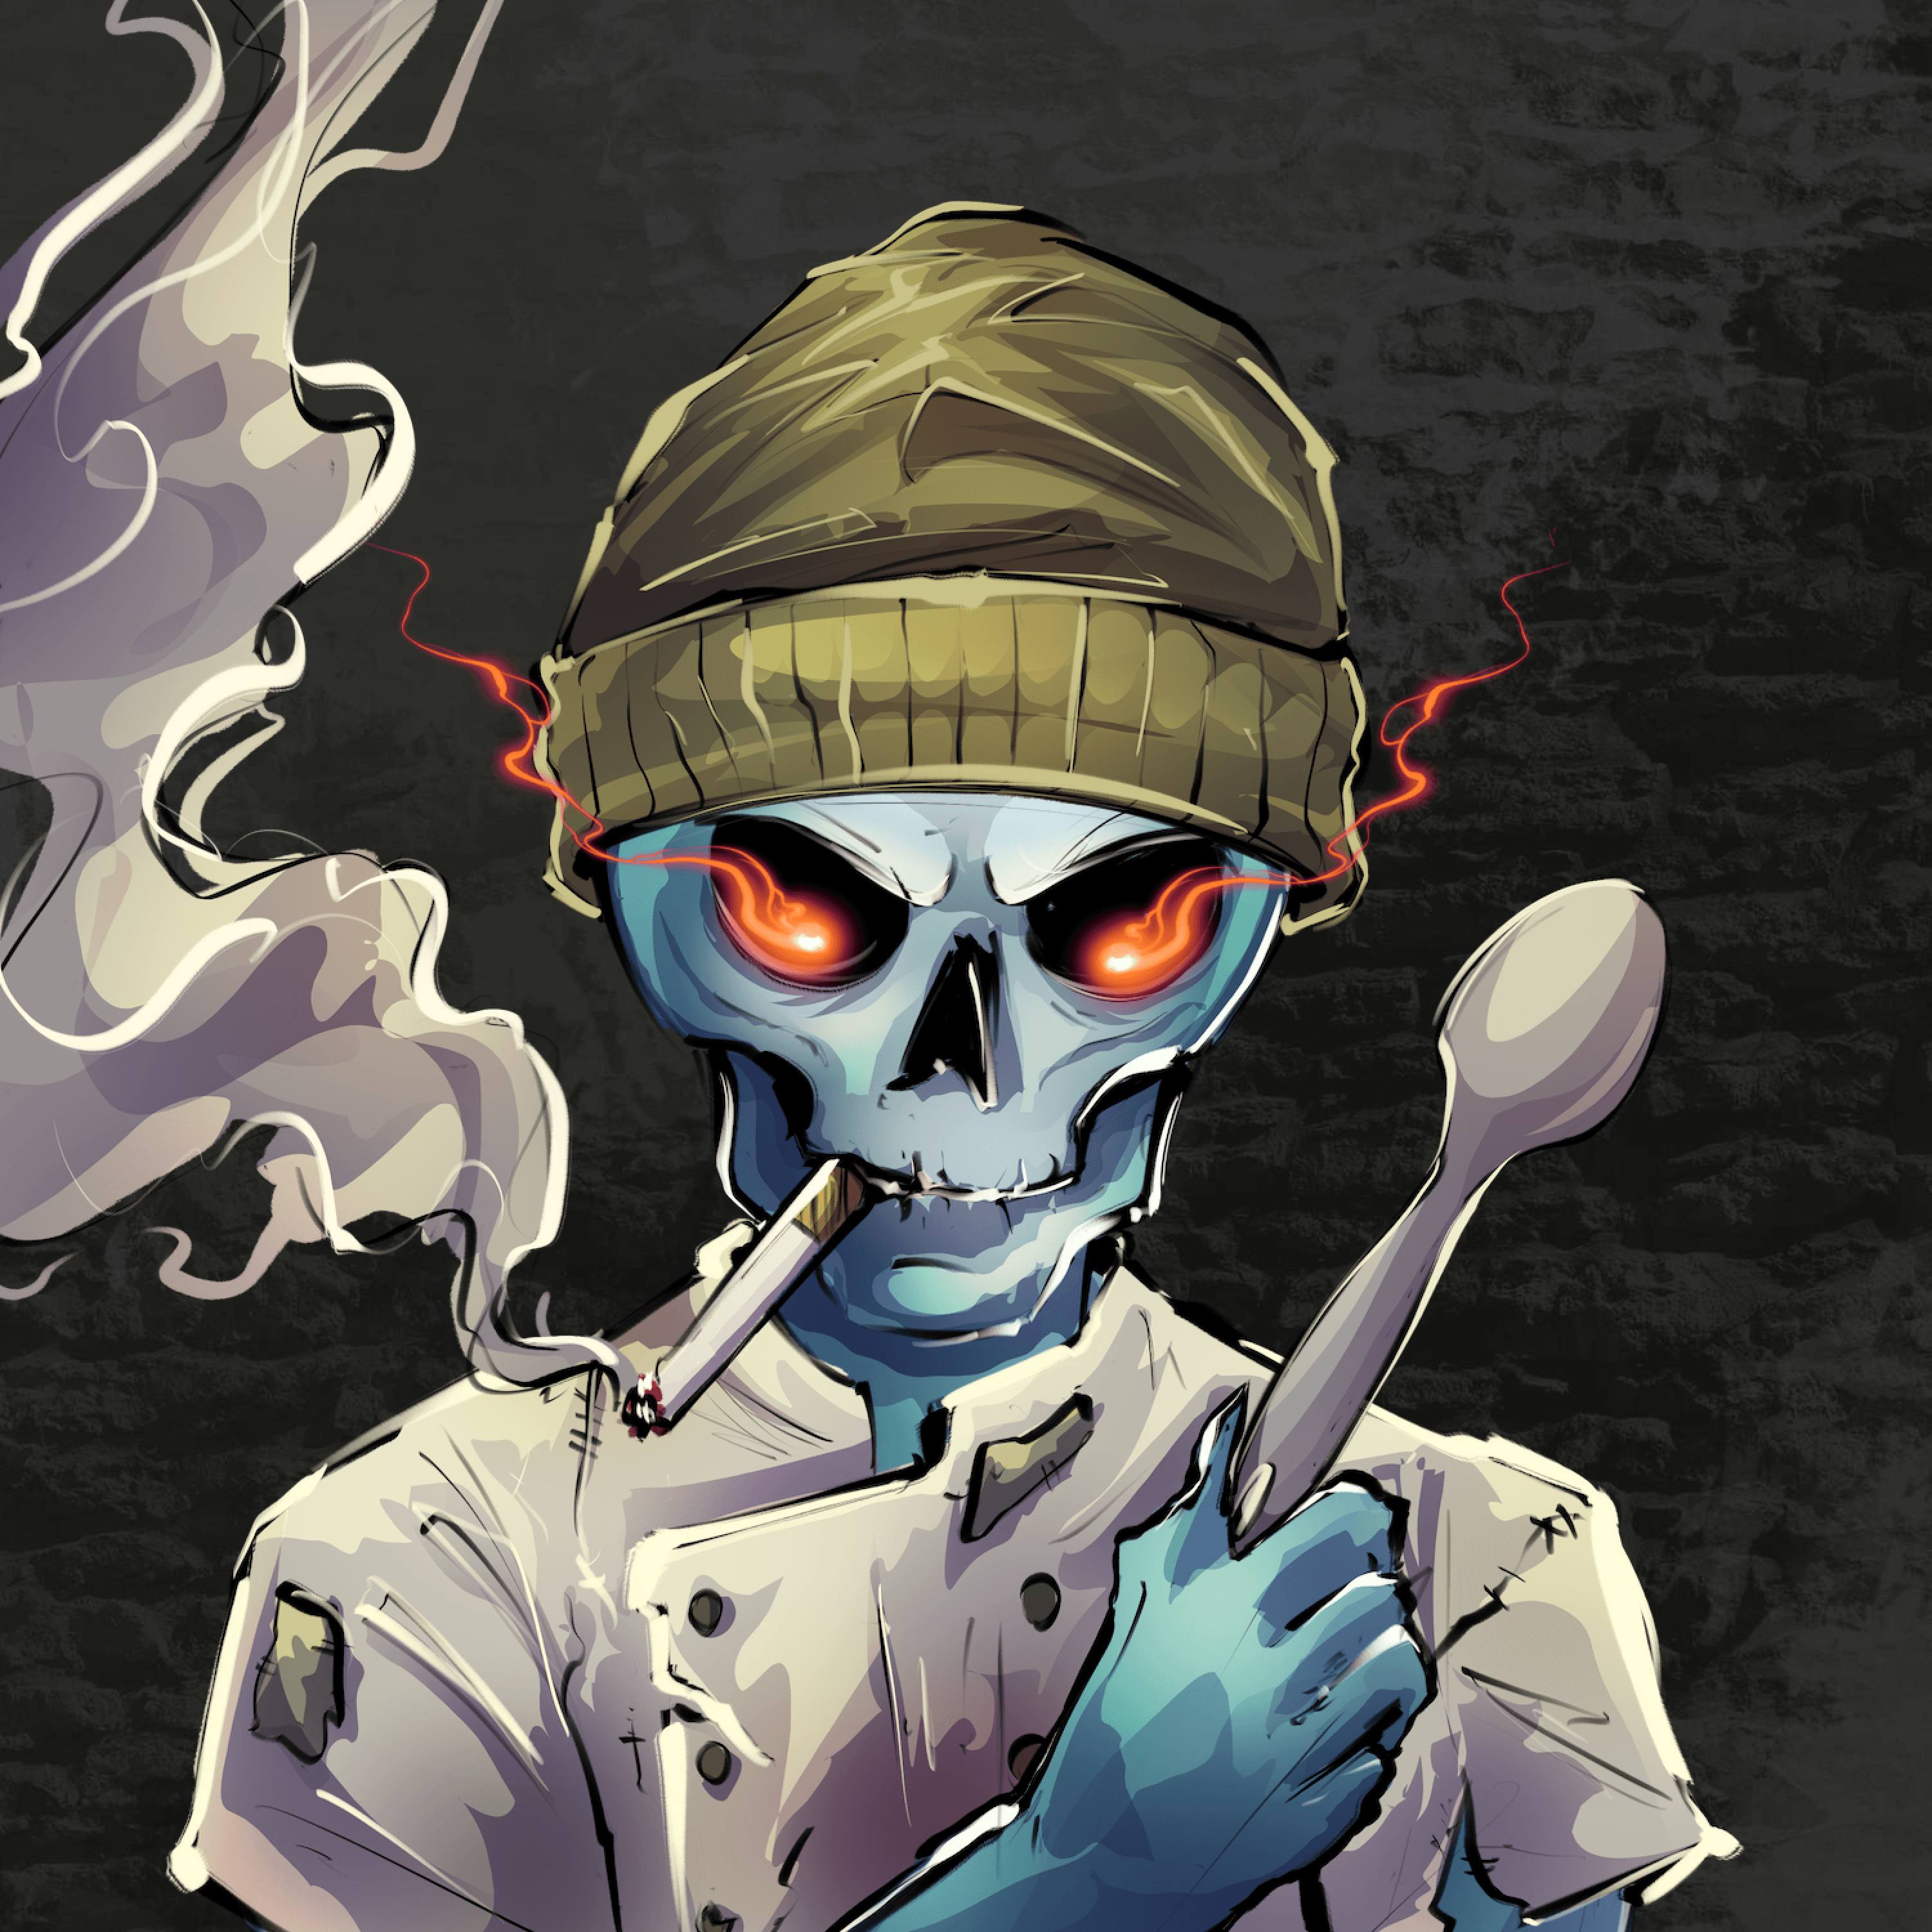 Undead Chefs #352